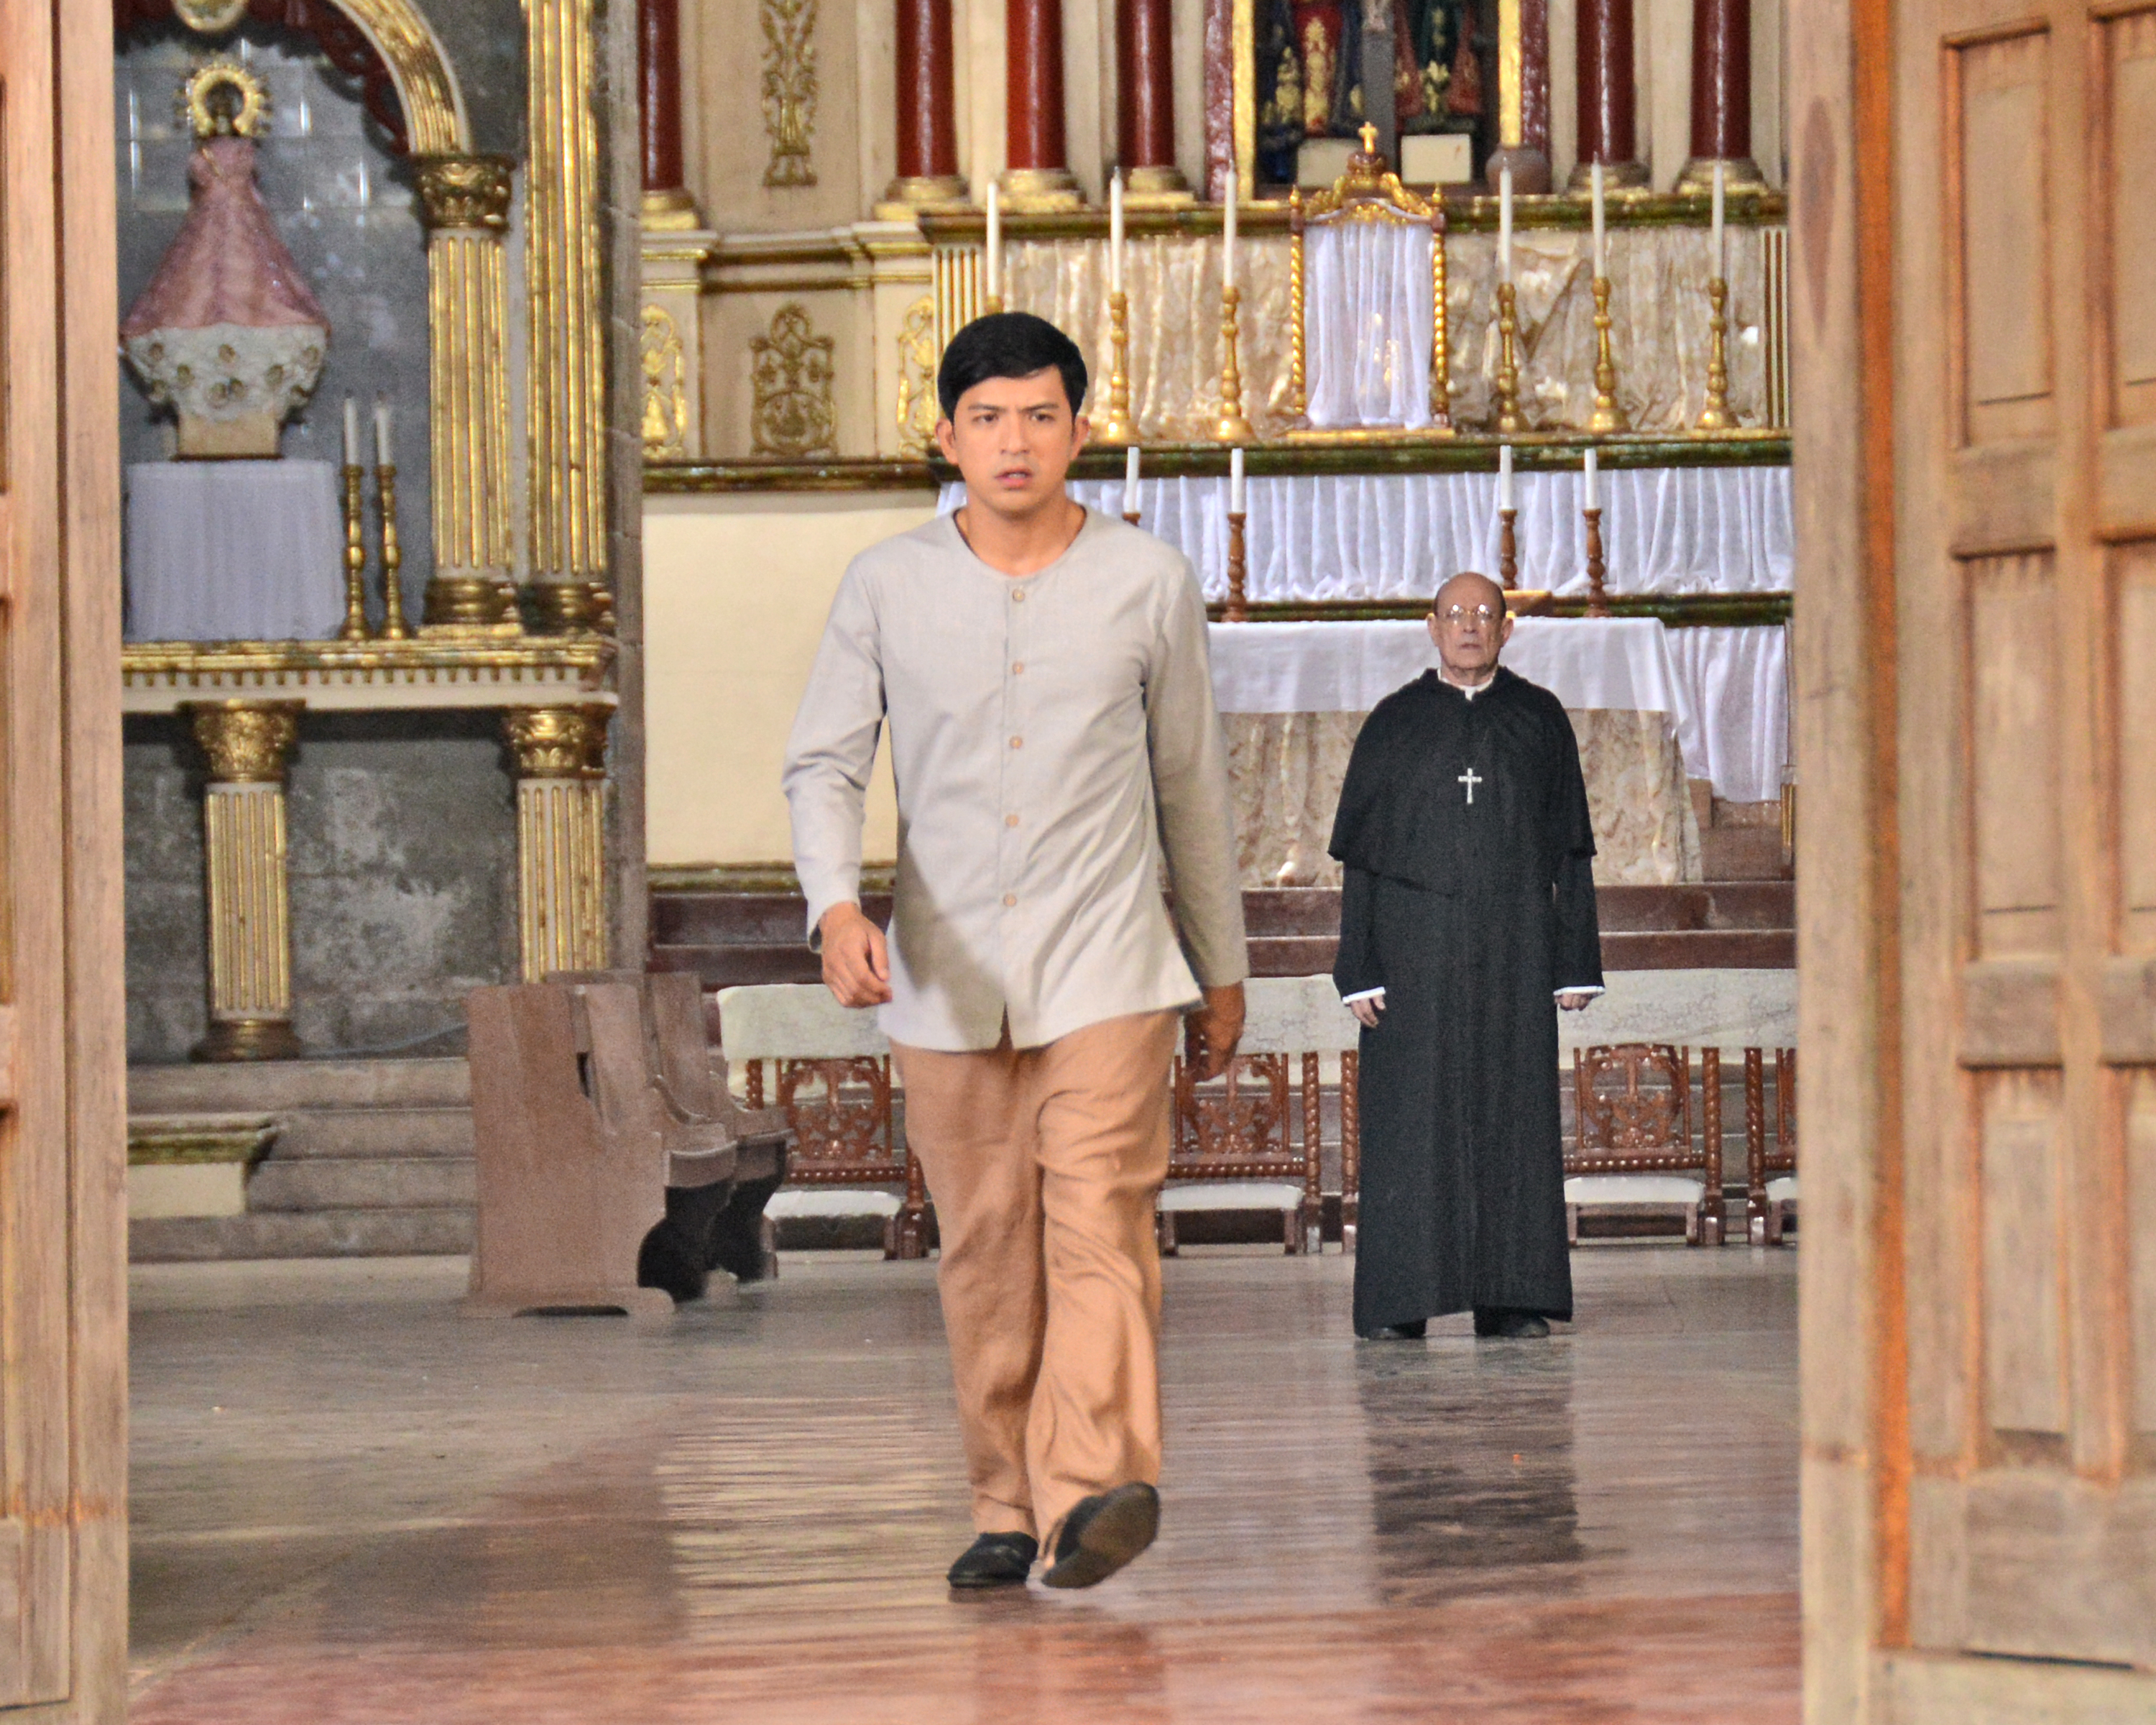 Upcoming biopic ‘Felix Manalo’ chronicles the life of an icon